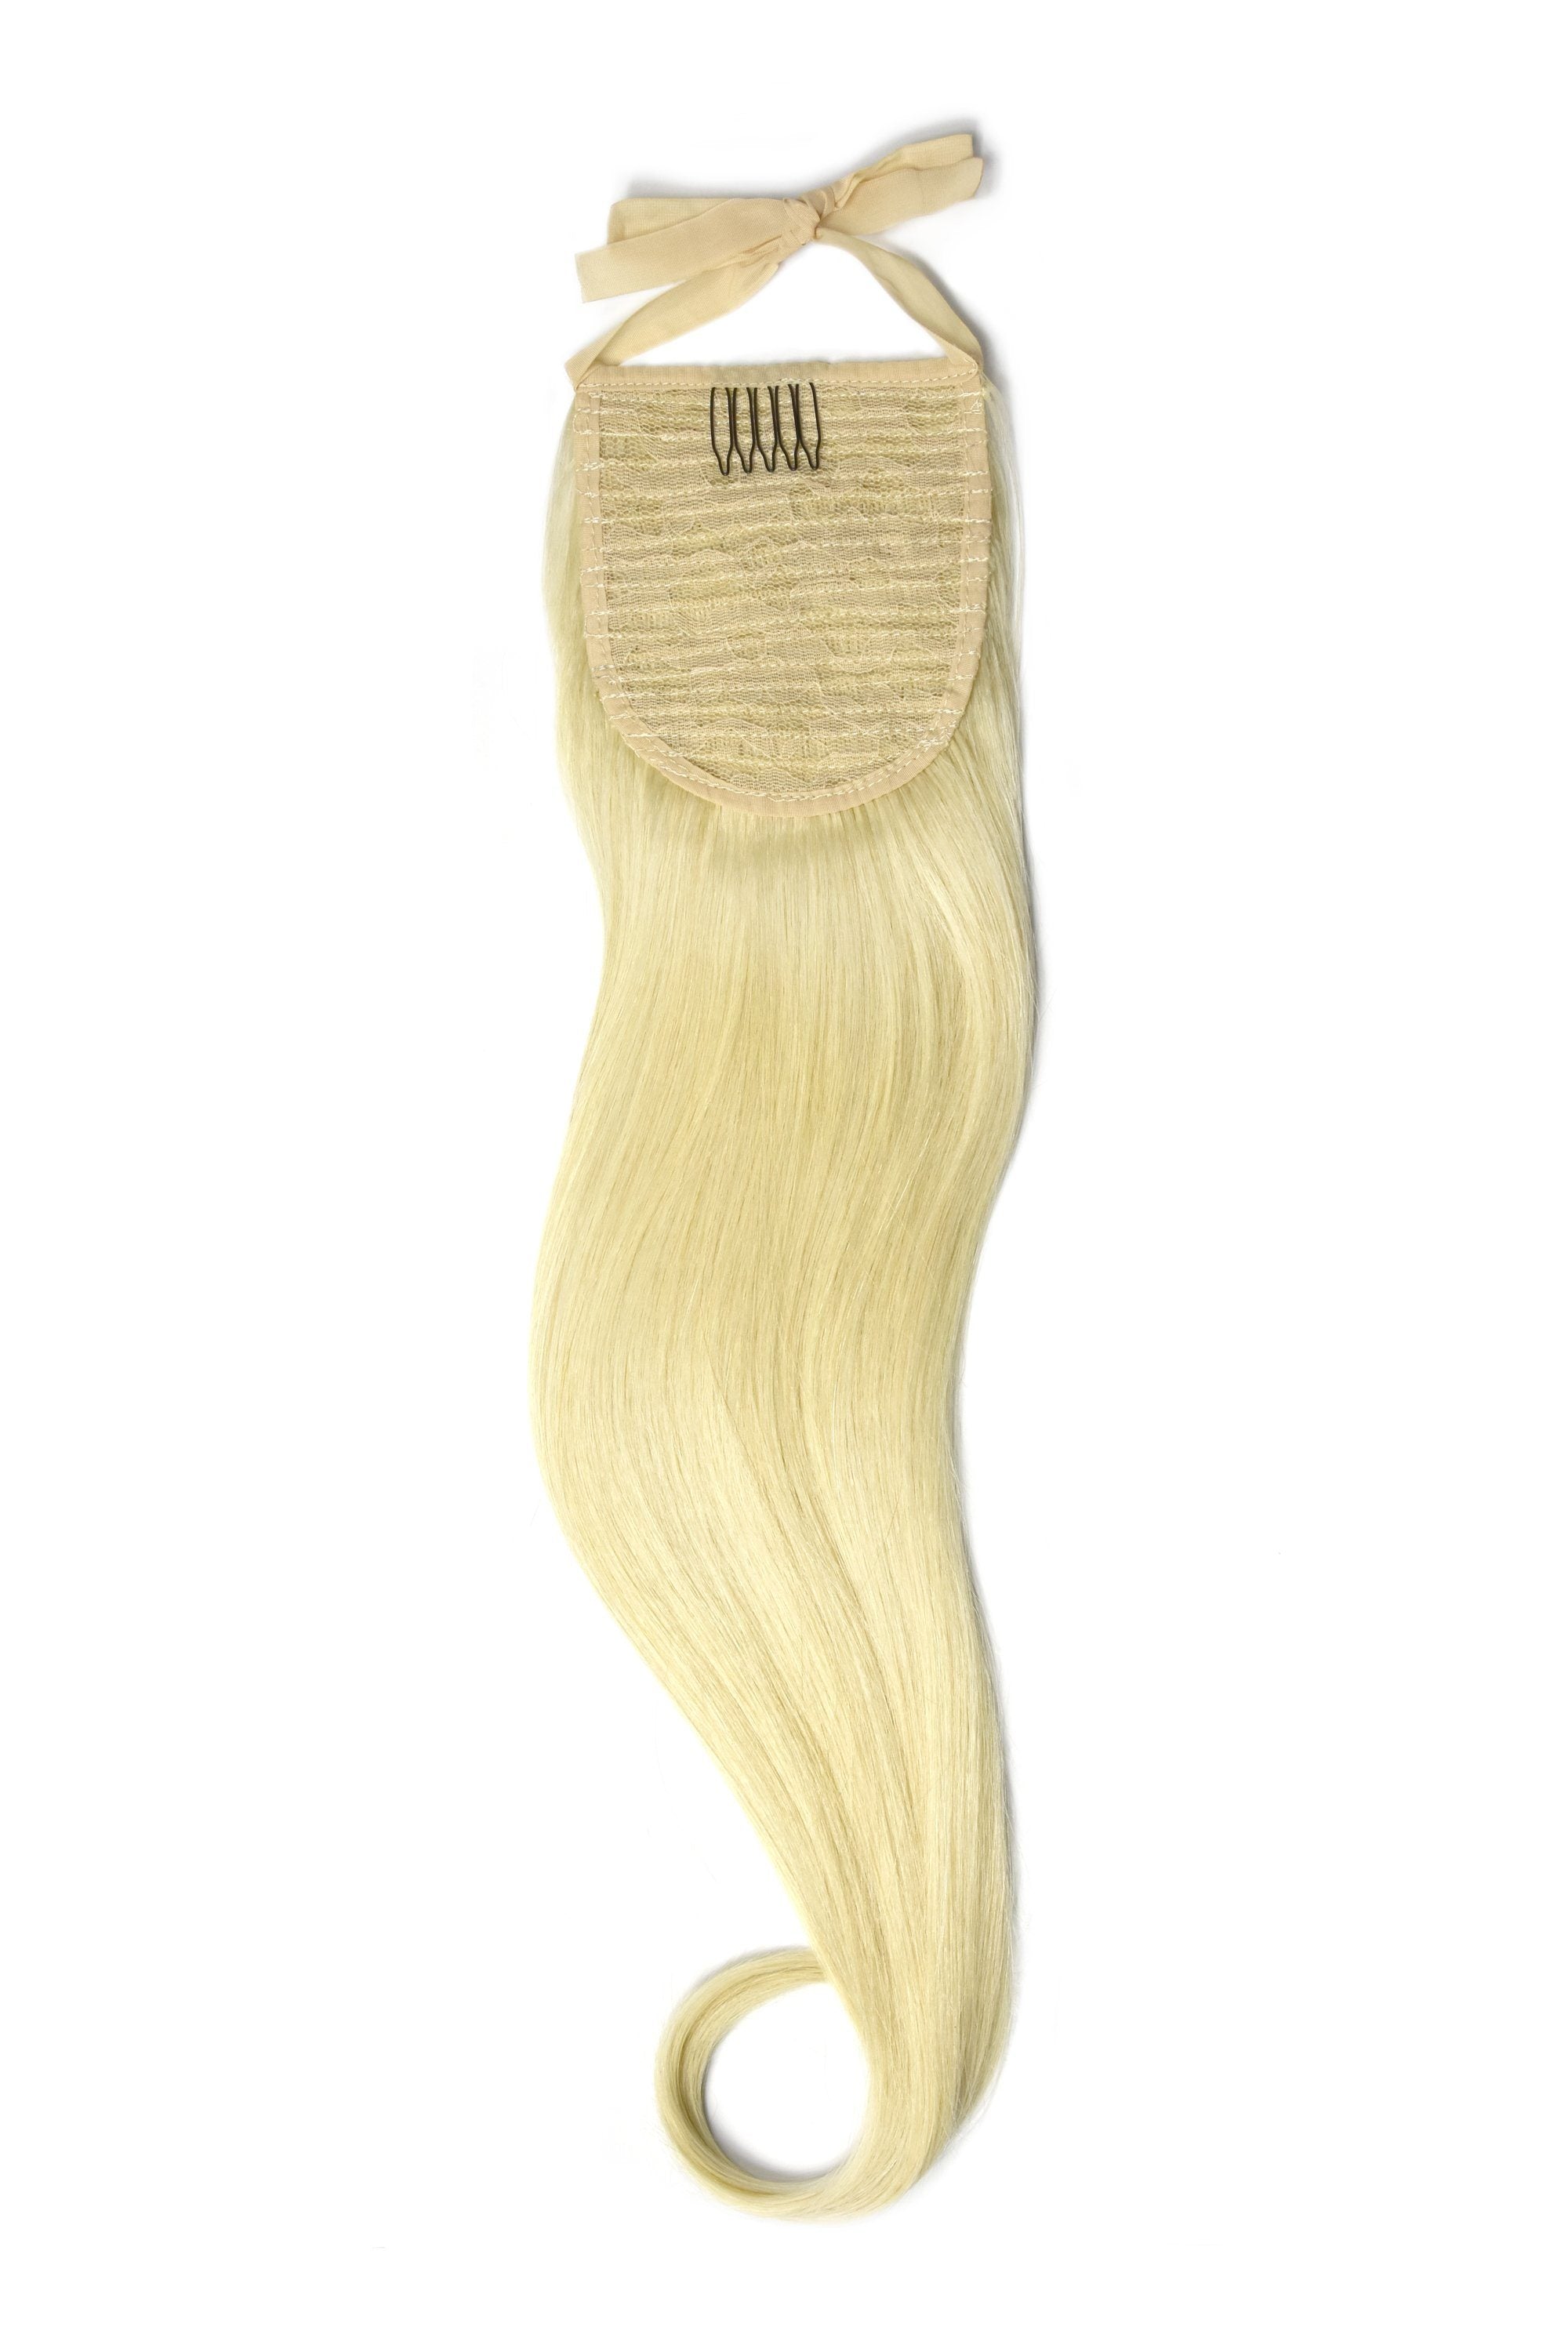 Clip in Ponytail Remy Human Hair Extensions - Bleach Blonde (#613) Clip In Ponytail Extensions > Ponytail extension > Clip in ponytail > Ponytail hair extensions cliphair 